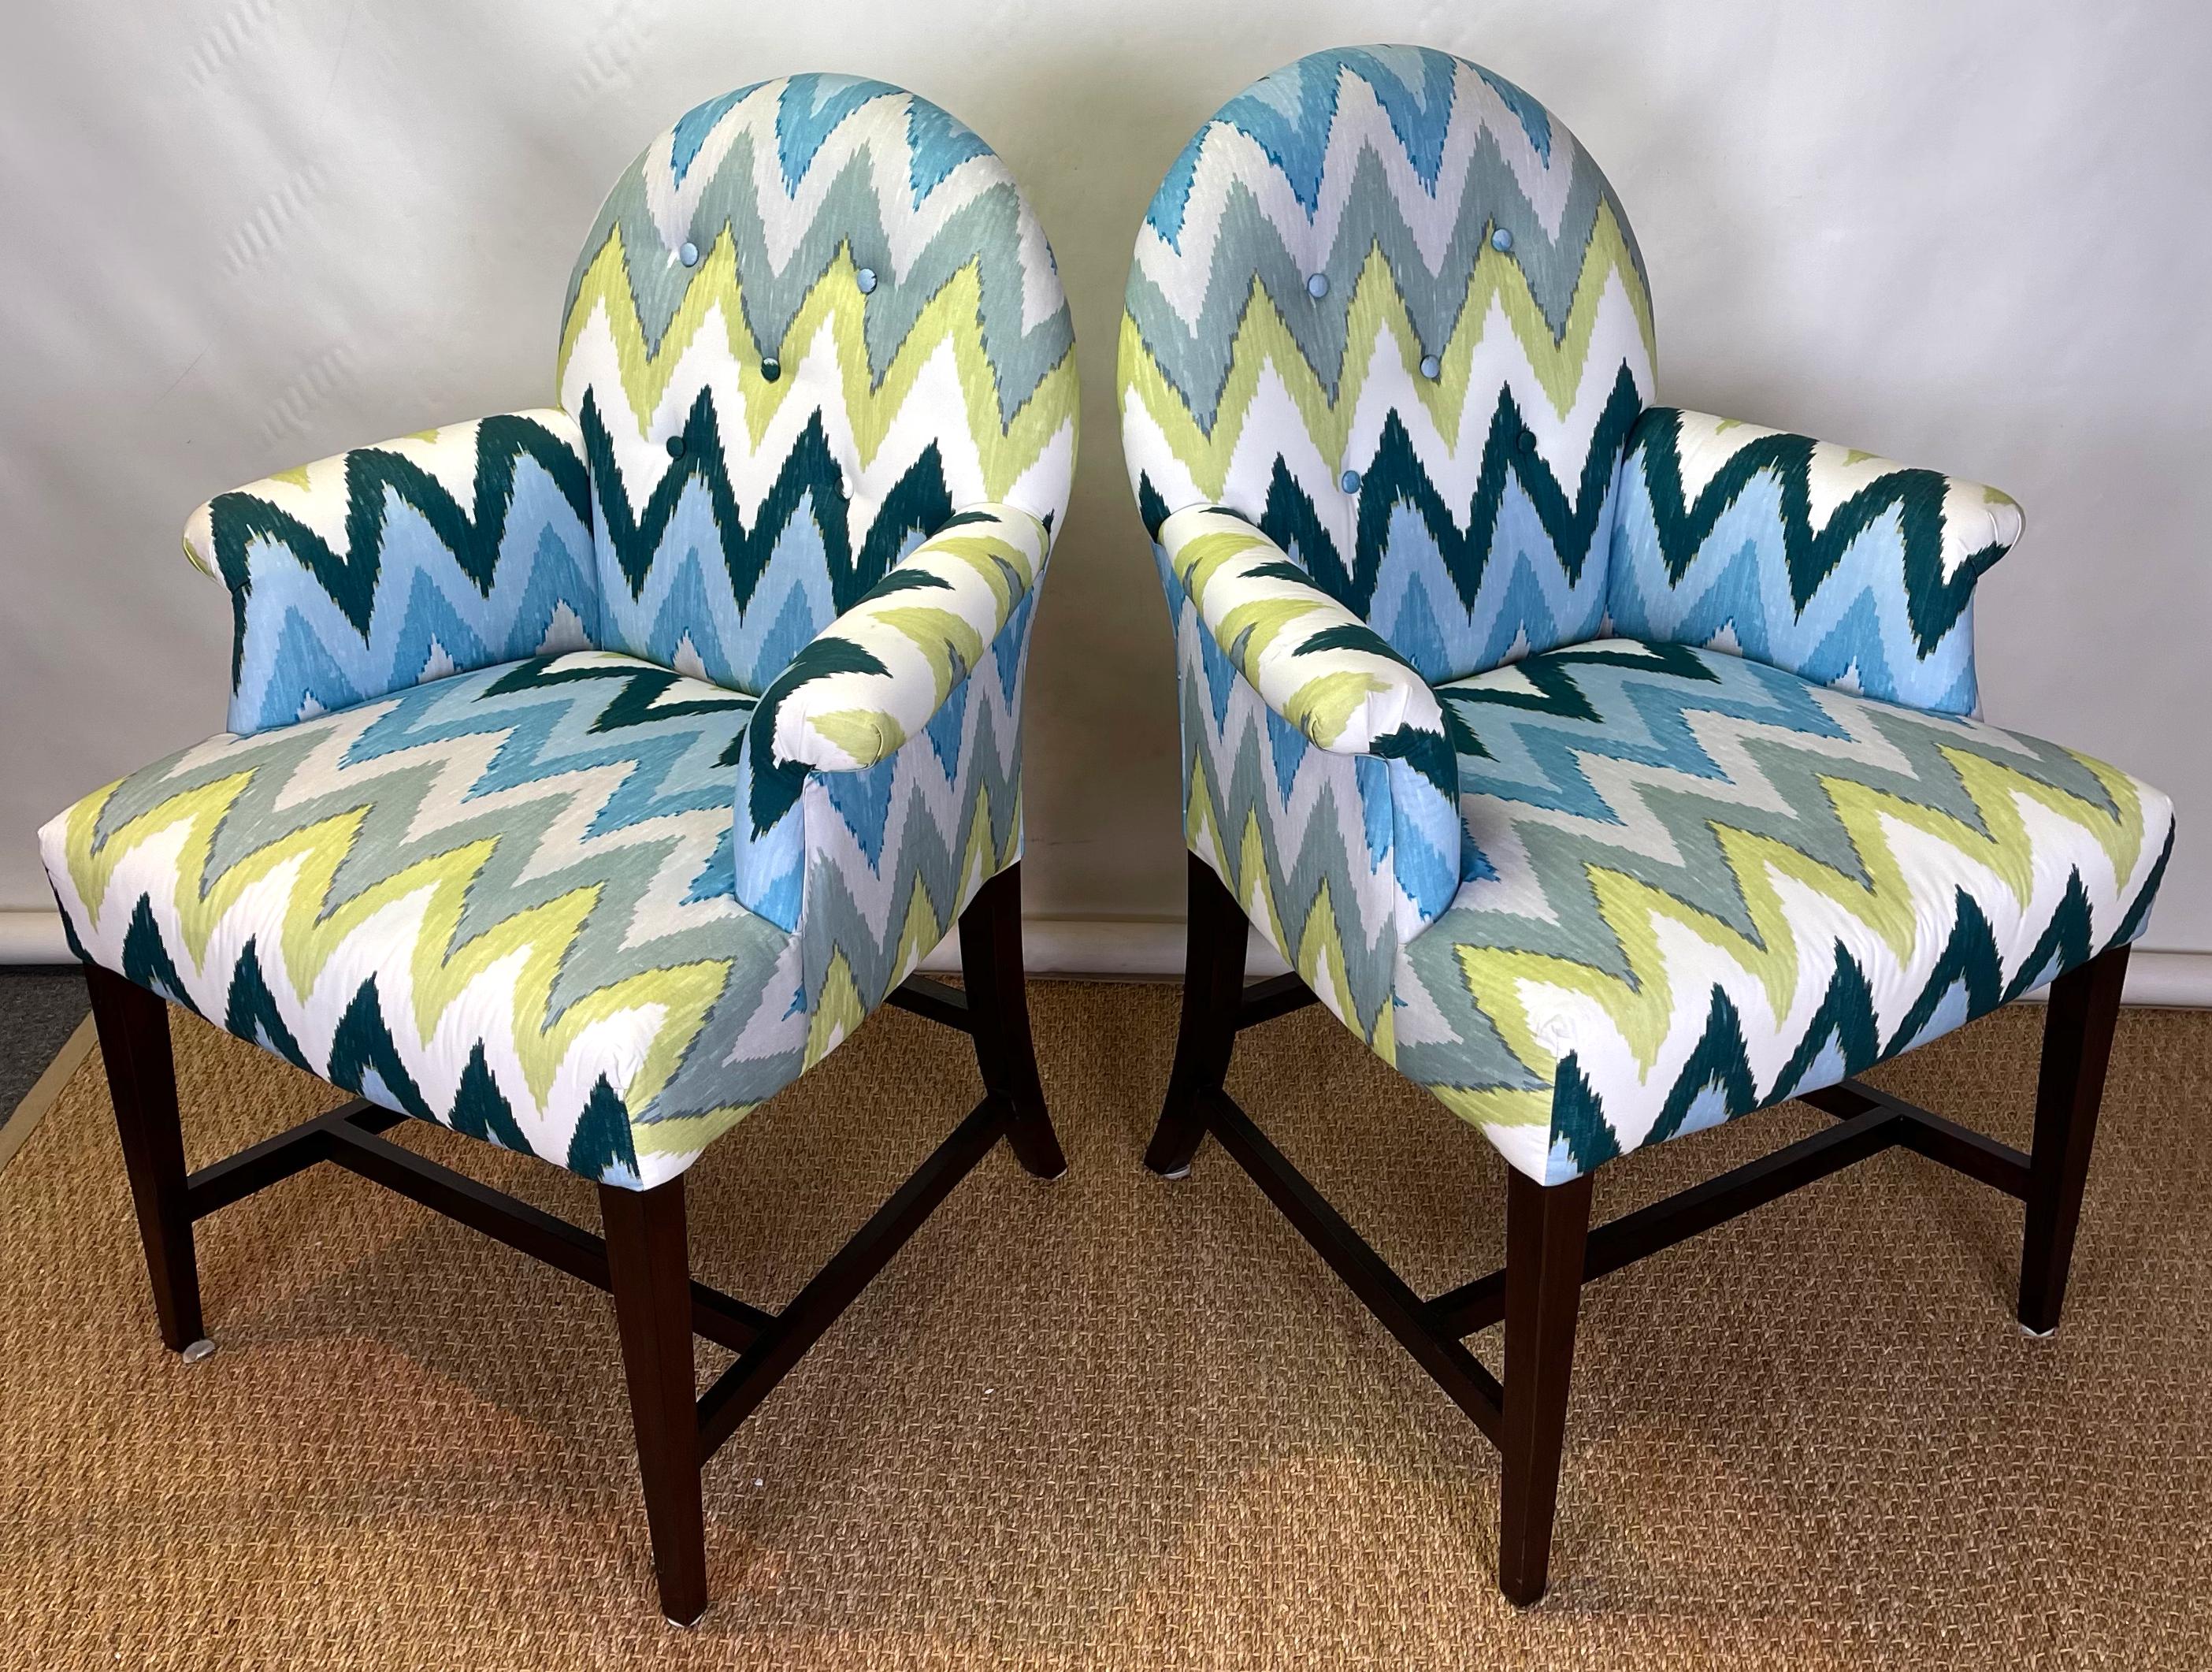 Set of Four Upholstered Armchairs In Good Condition For Sale In Kilmarnock, VA